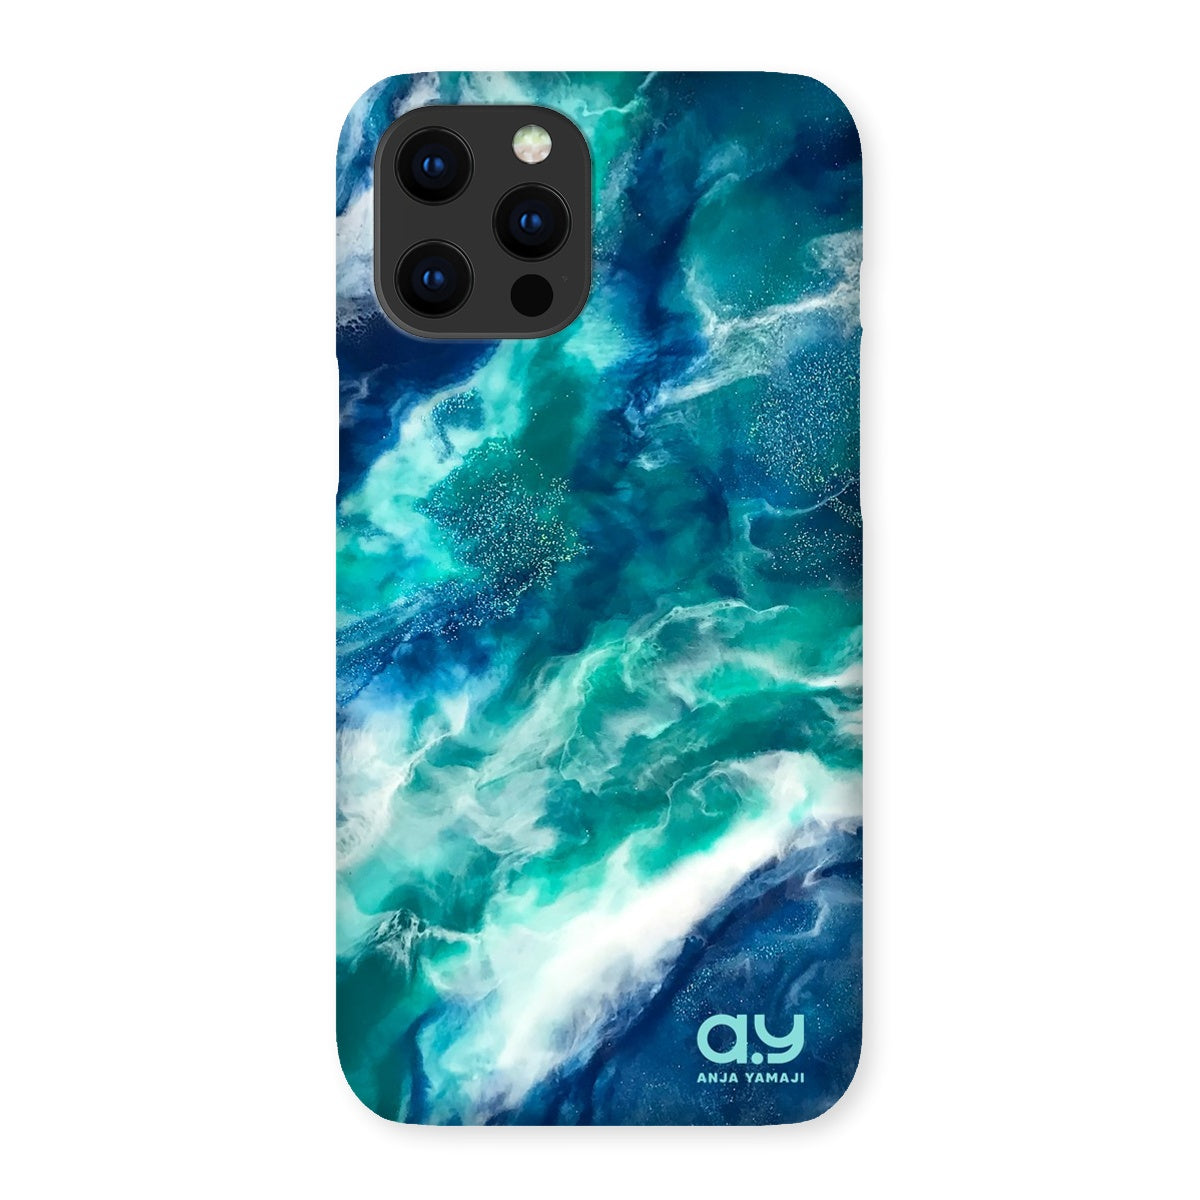 WATER Phone Case